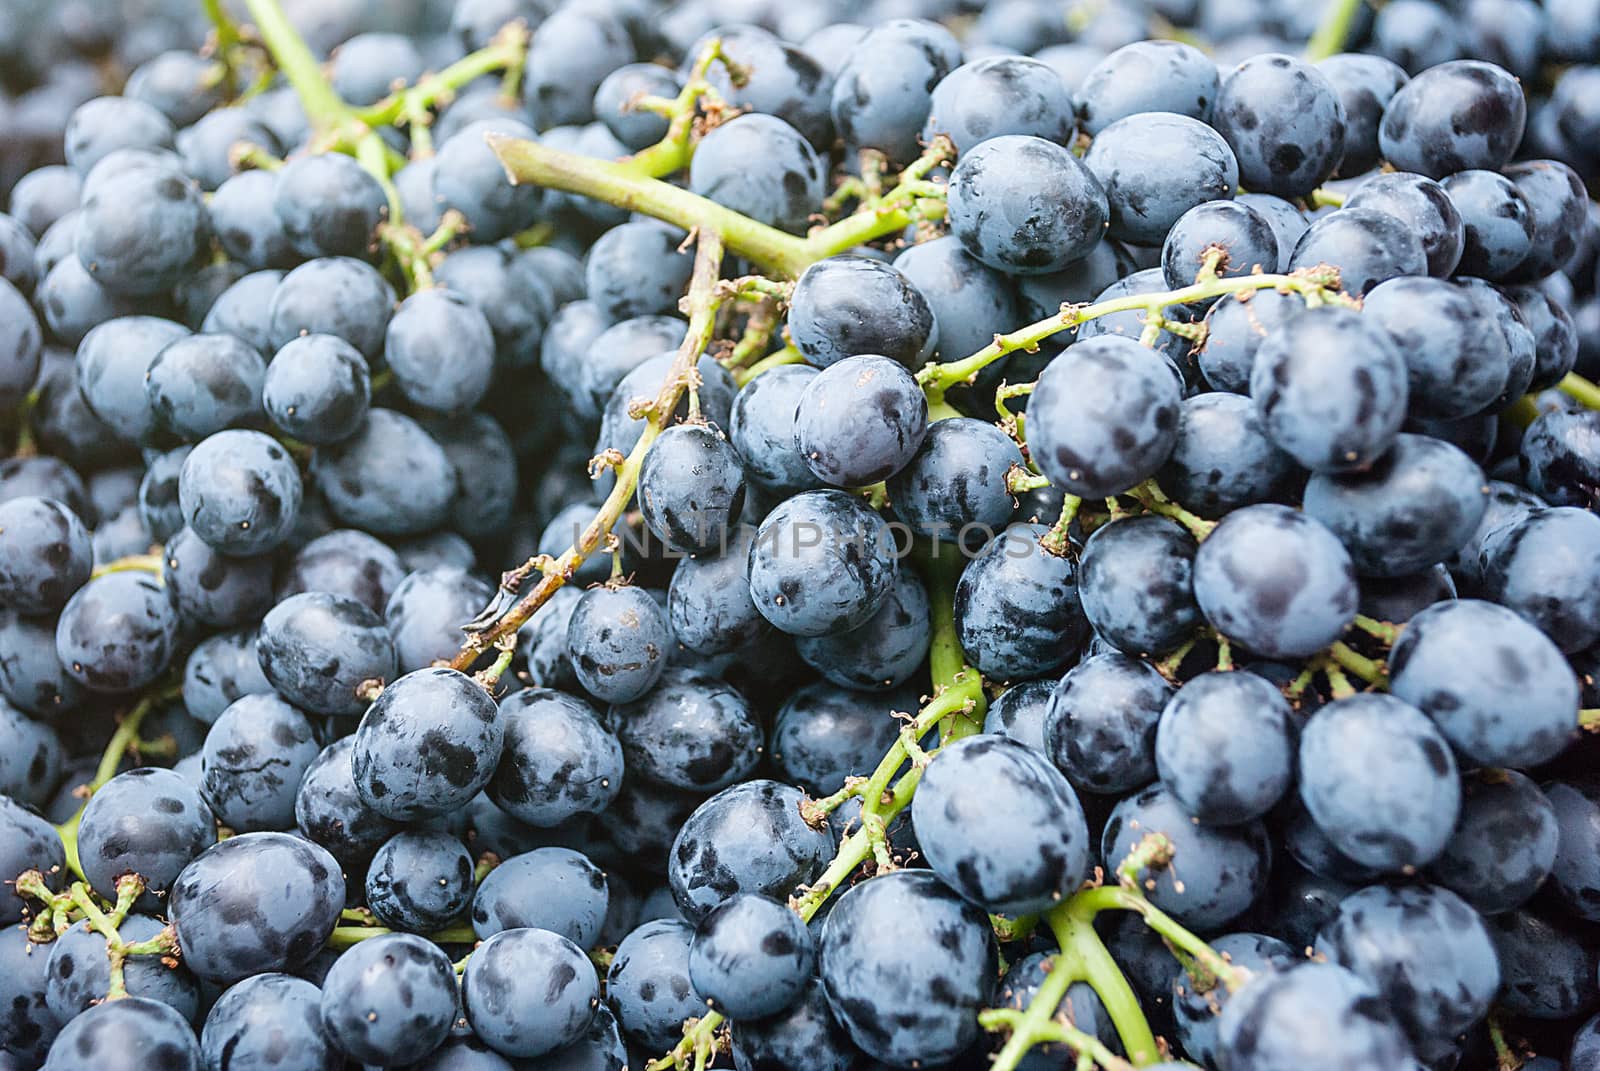 image of Grape, background for used